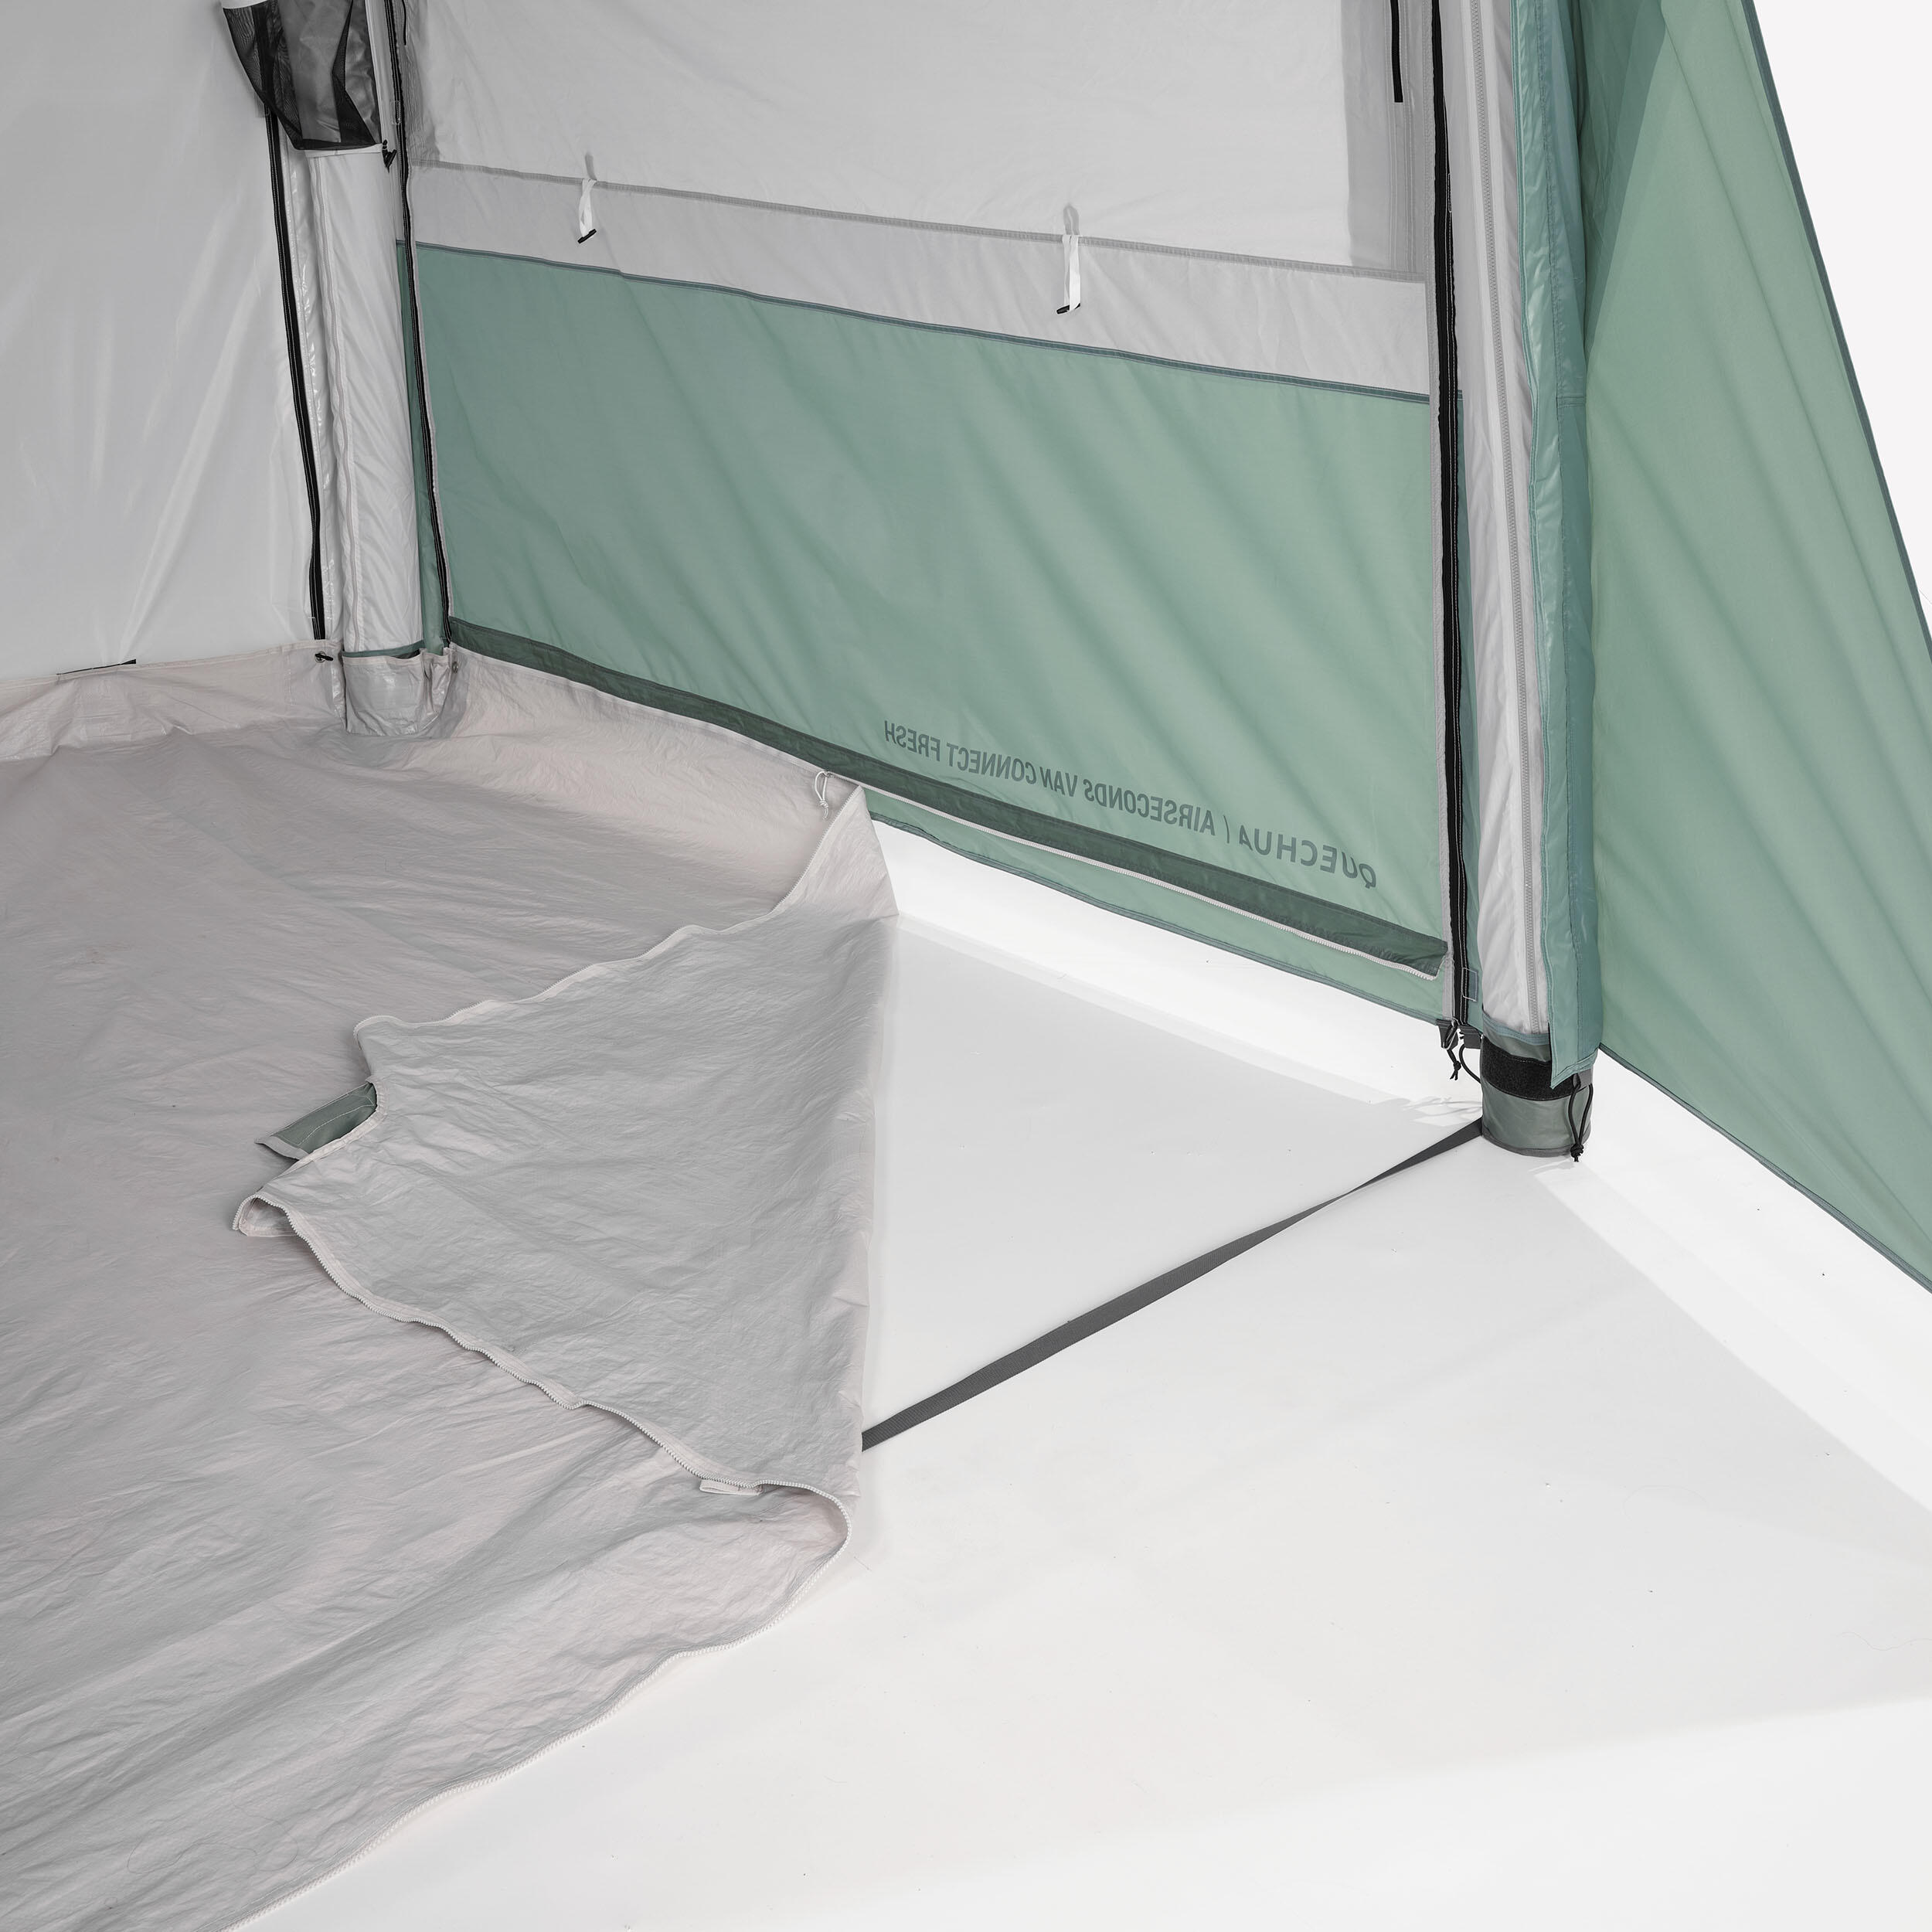 Van and truck inflatable canopy - Van Connect Air Seconds Fresh - 6 people 15/15